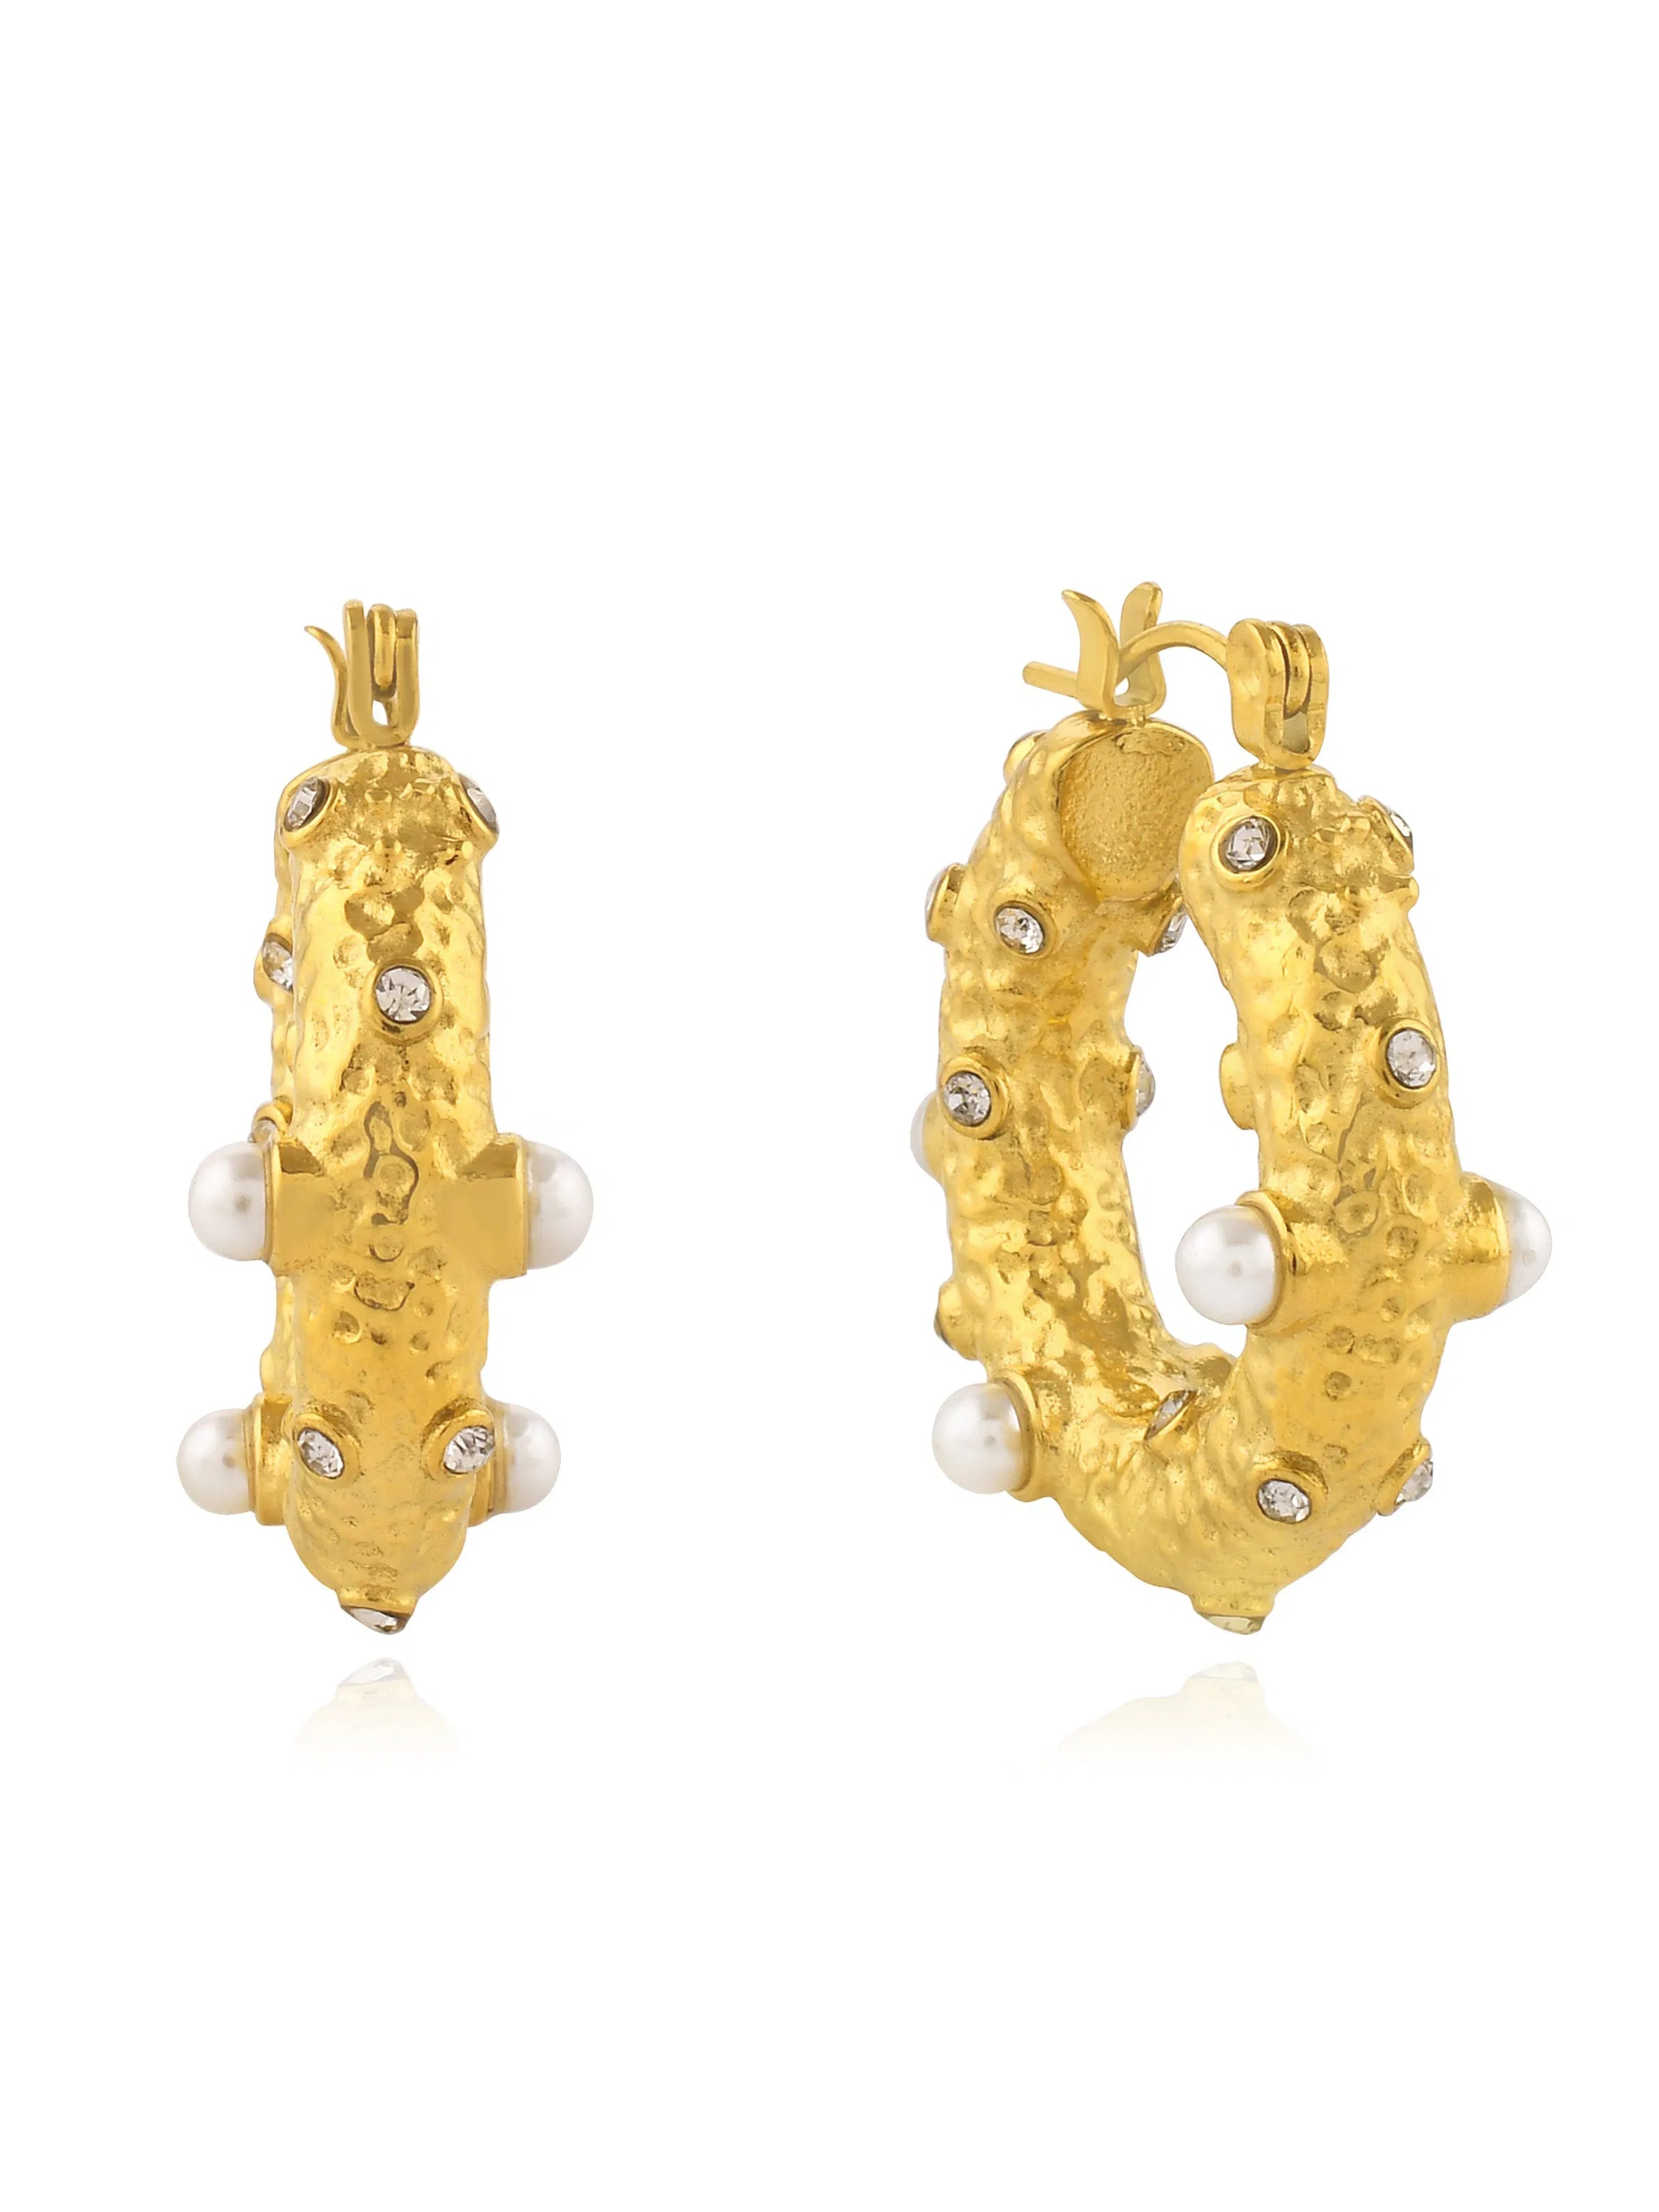 A pair of Shyla yellow gold hoop earrings with pearls.